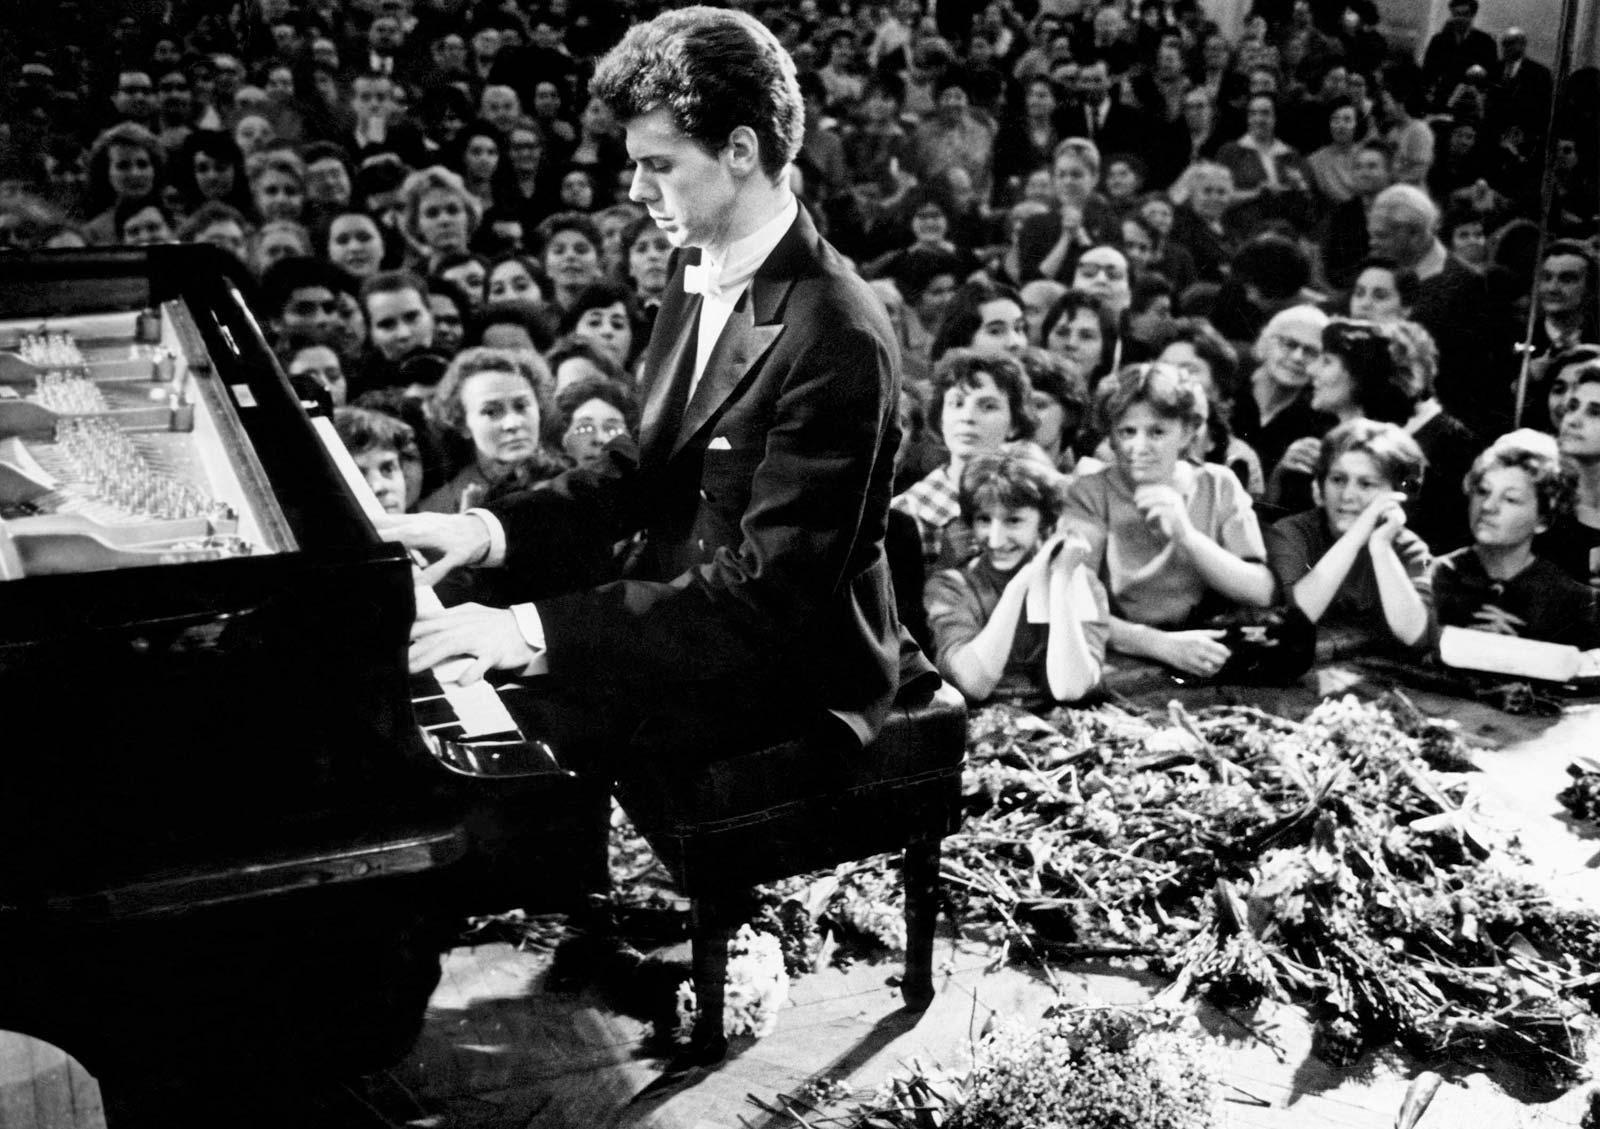 What the Cliburn contest thinks of pianists